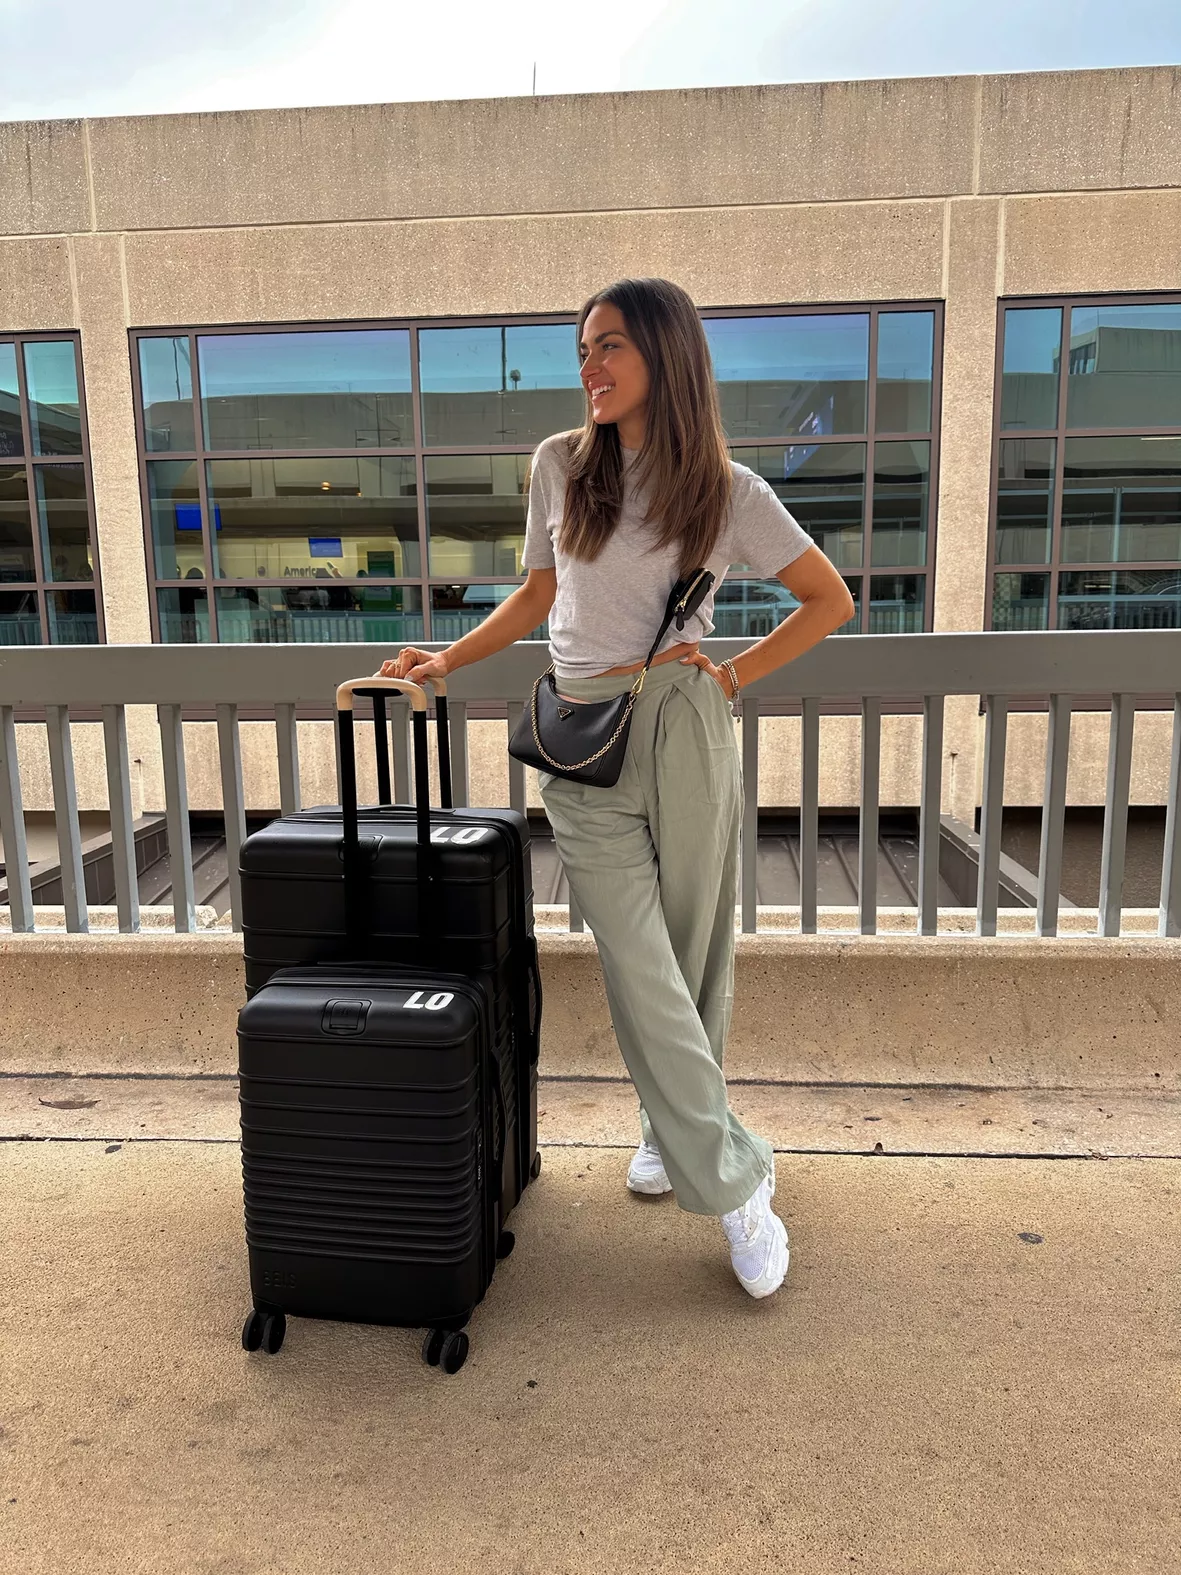 LTK - Hi lovelies, I'm Iva Nikolina Jurić and I'll be taking over  Liketoknow.it.europe all day showing my travel looks and tips on styling  your favourite #LTKitbag. First up: these nude pants